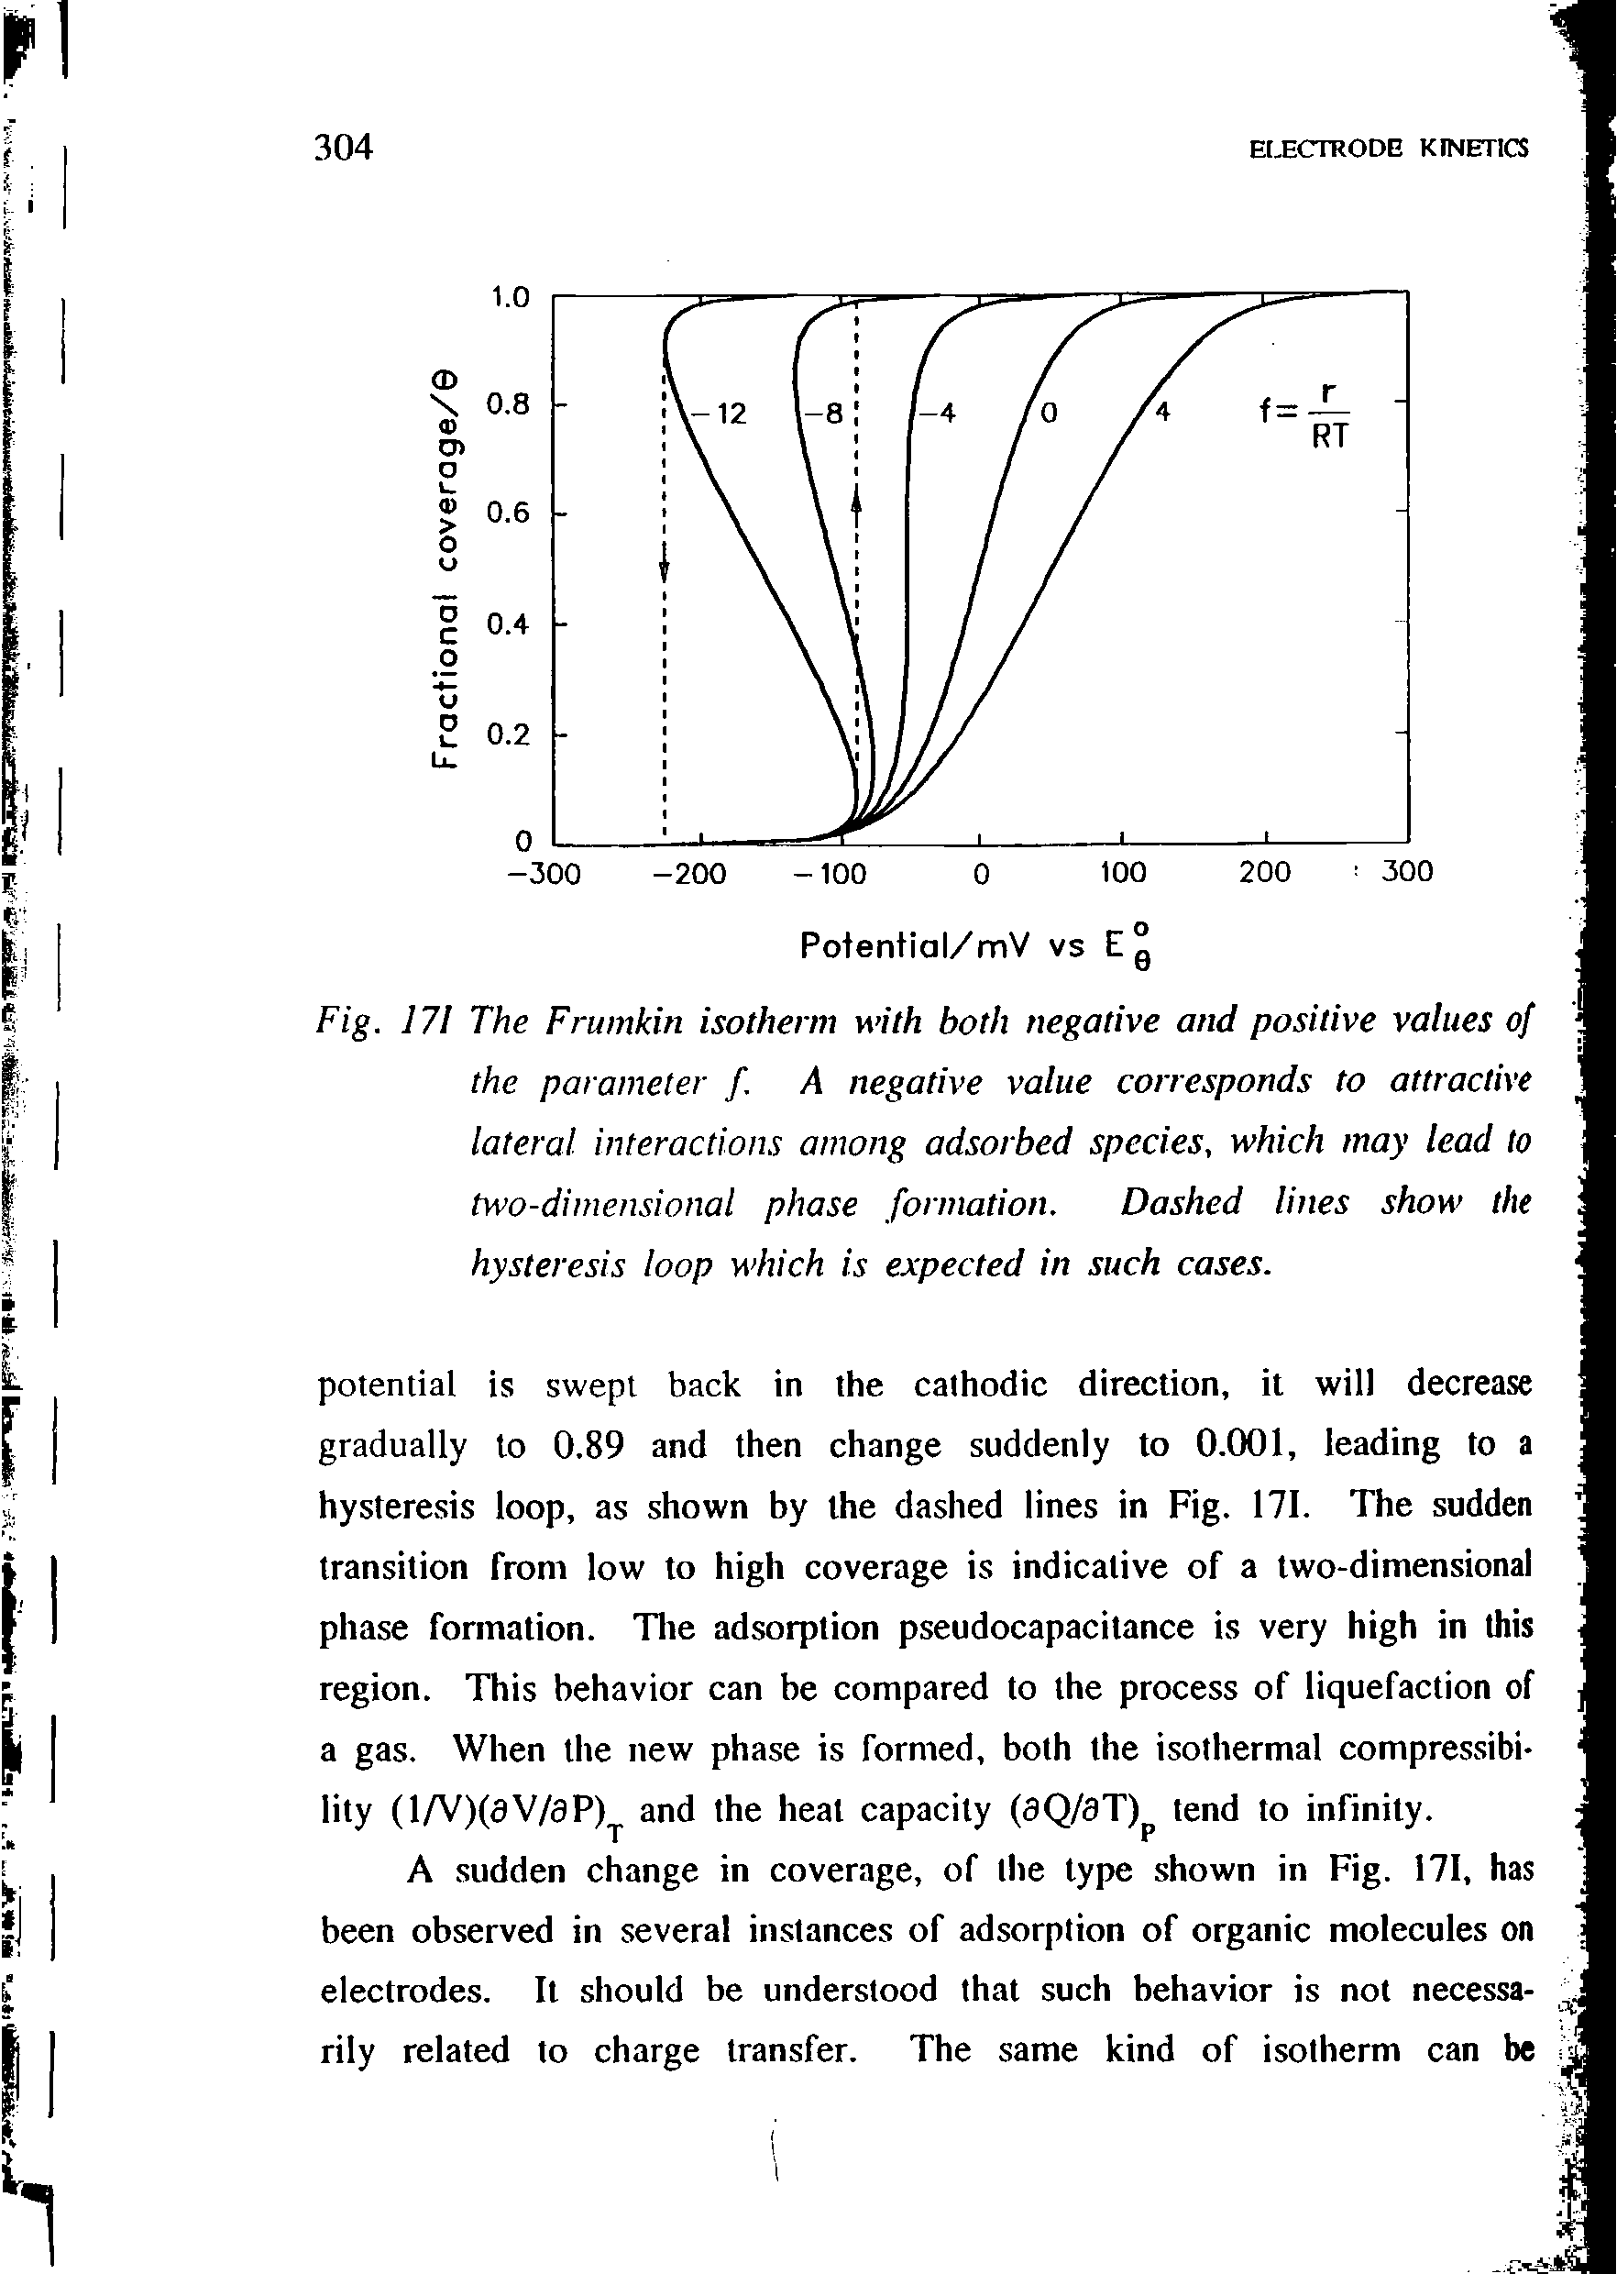 Fig. 171 The Frumkin isotherm with both negative and positive values of the parameter f. A negative value corresponds to attractive lateral interactions among adsorbed species, which may lead to two-dimensional phase formation. Dashed lines show the hysteresis loop which is expected in such cases.